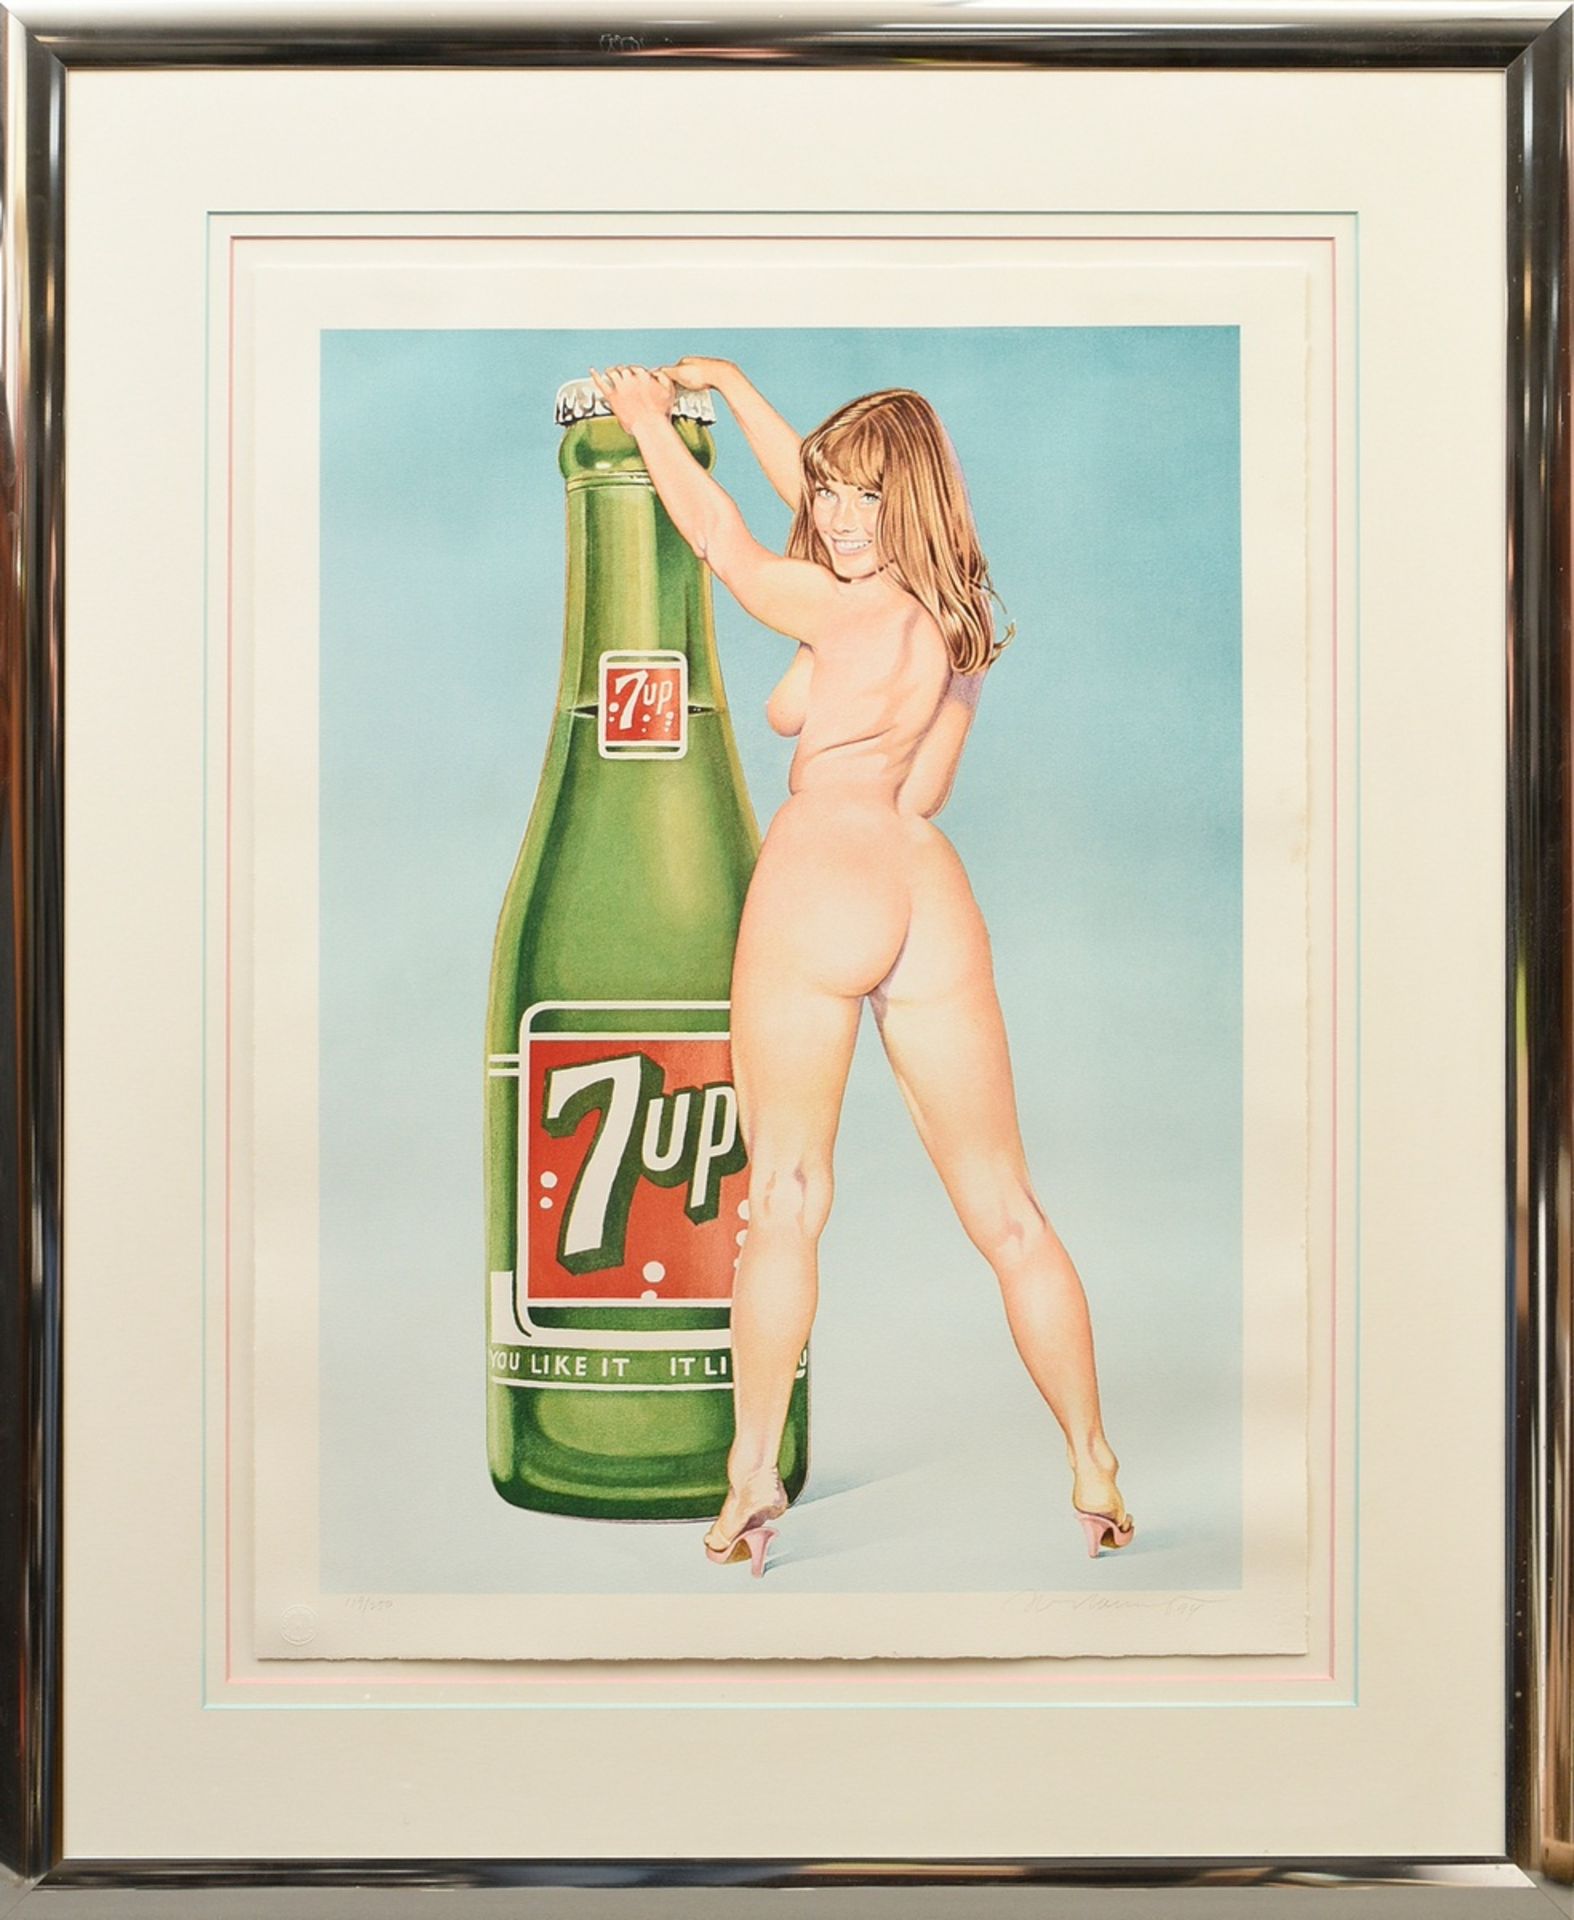 Ramos, Mel (1935-2018) "You Like it - it Likes you (7Up)" 1994, Farblithographie, 119/250, u. sign. - Bild 2 aus 3